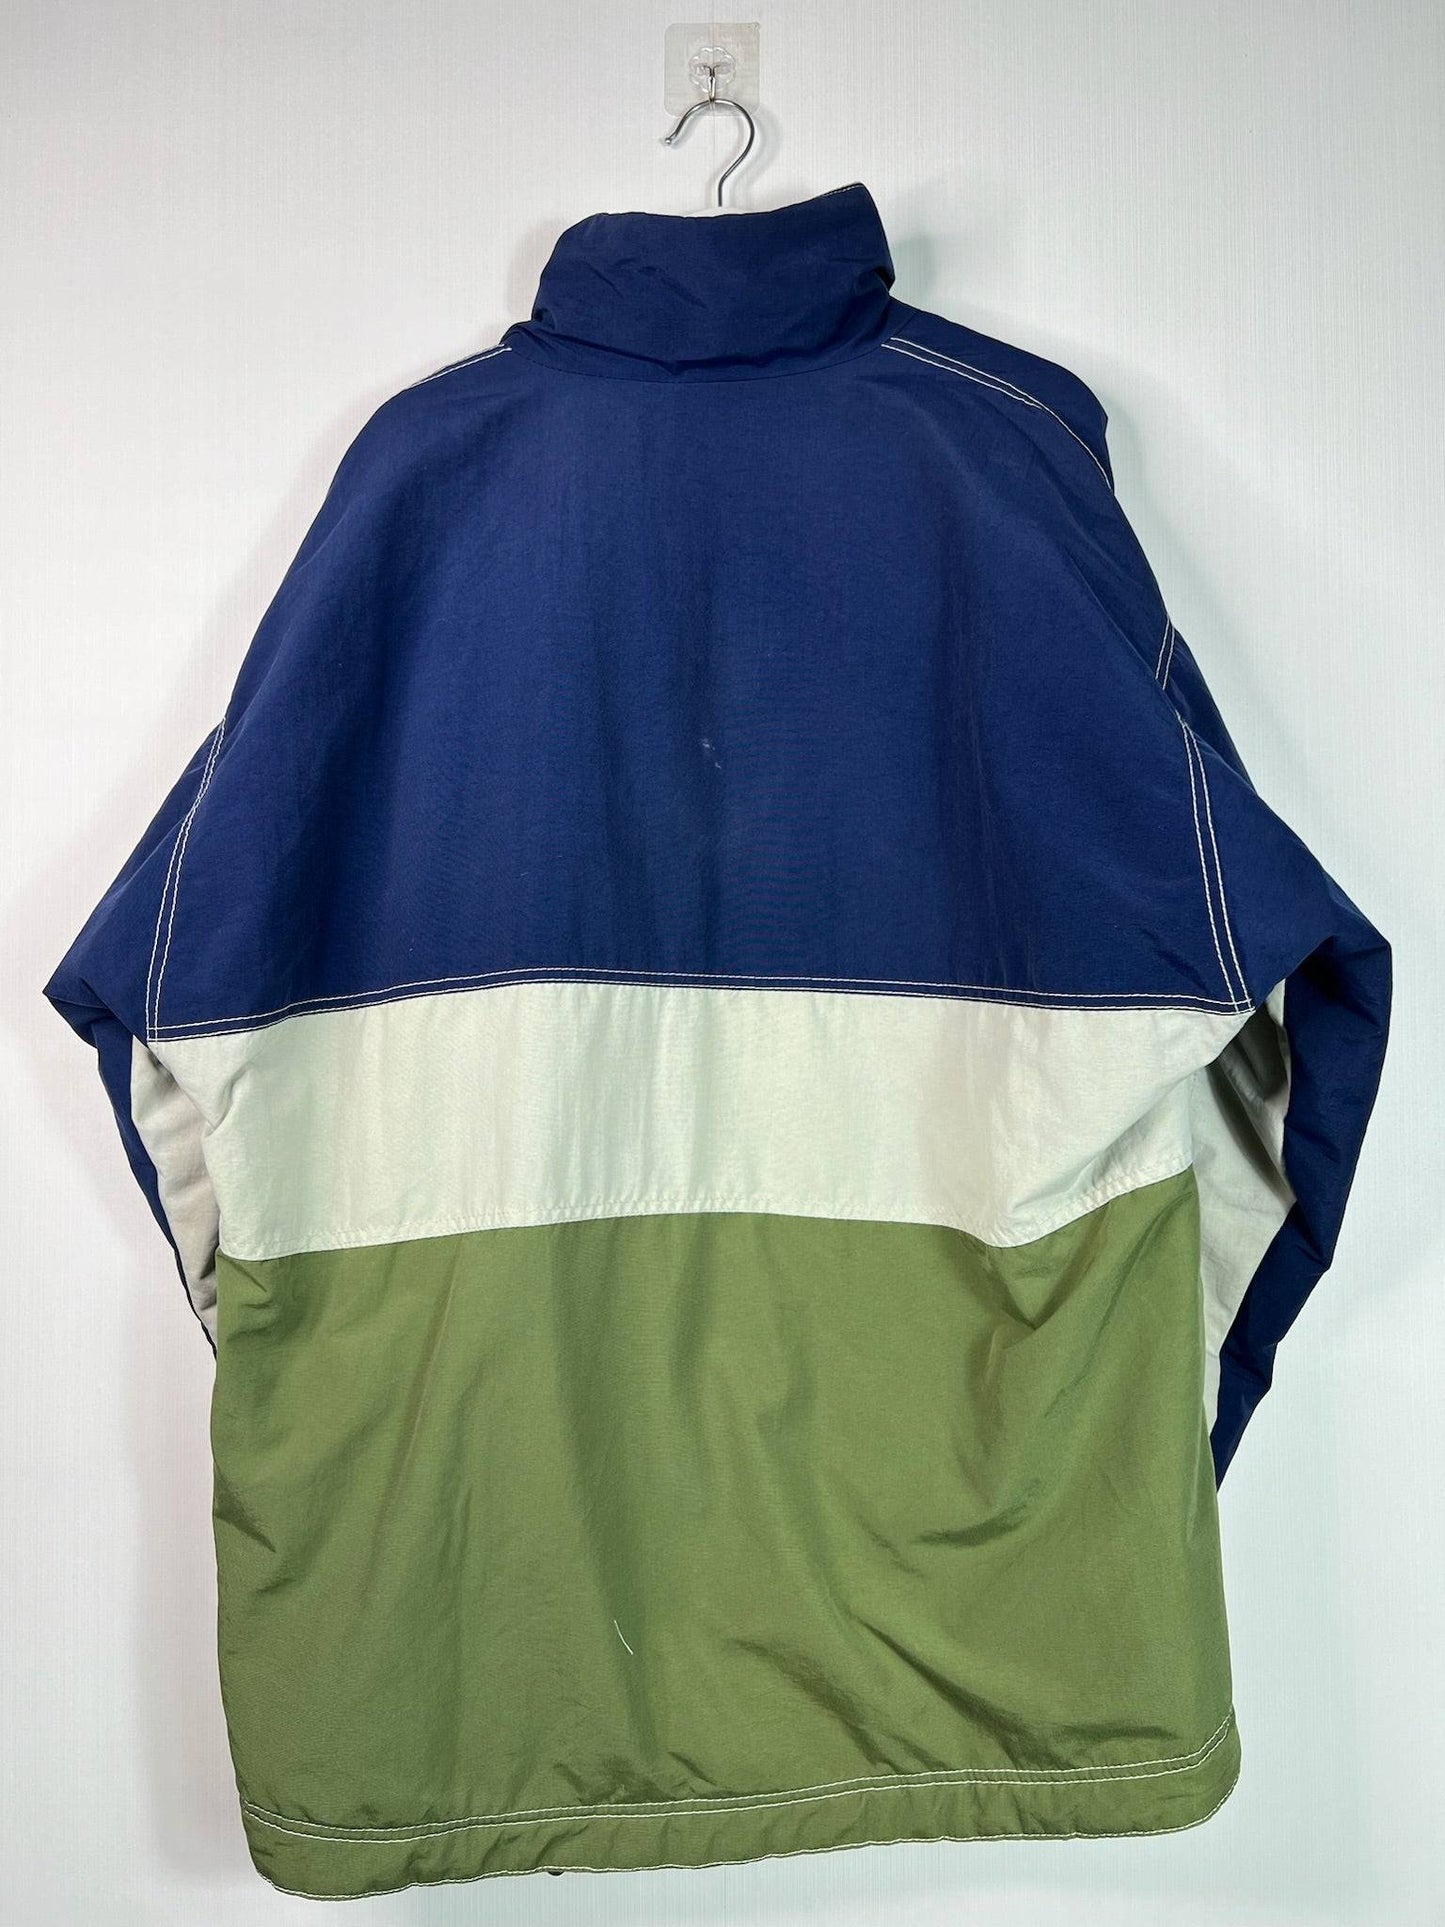 Inside Funwear Olive Green and Blue Jacket  | Fits Upto XL/2XL